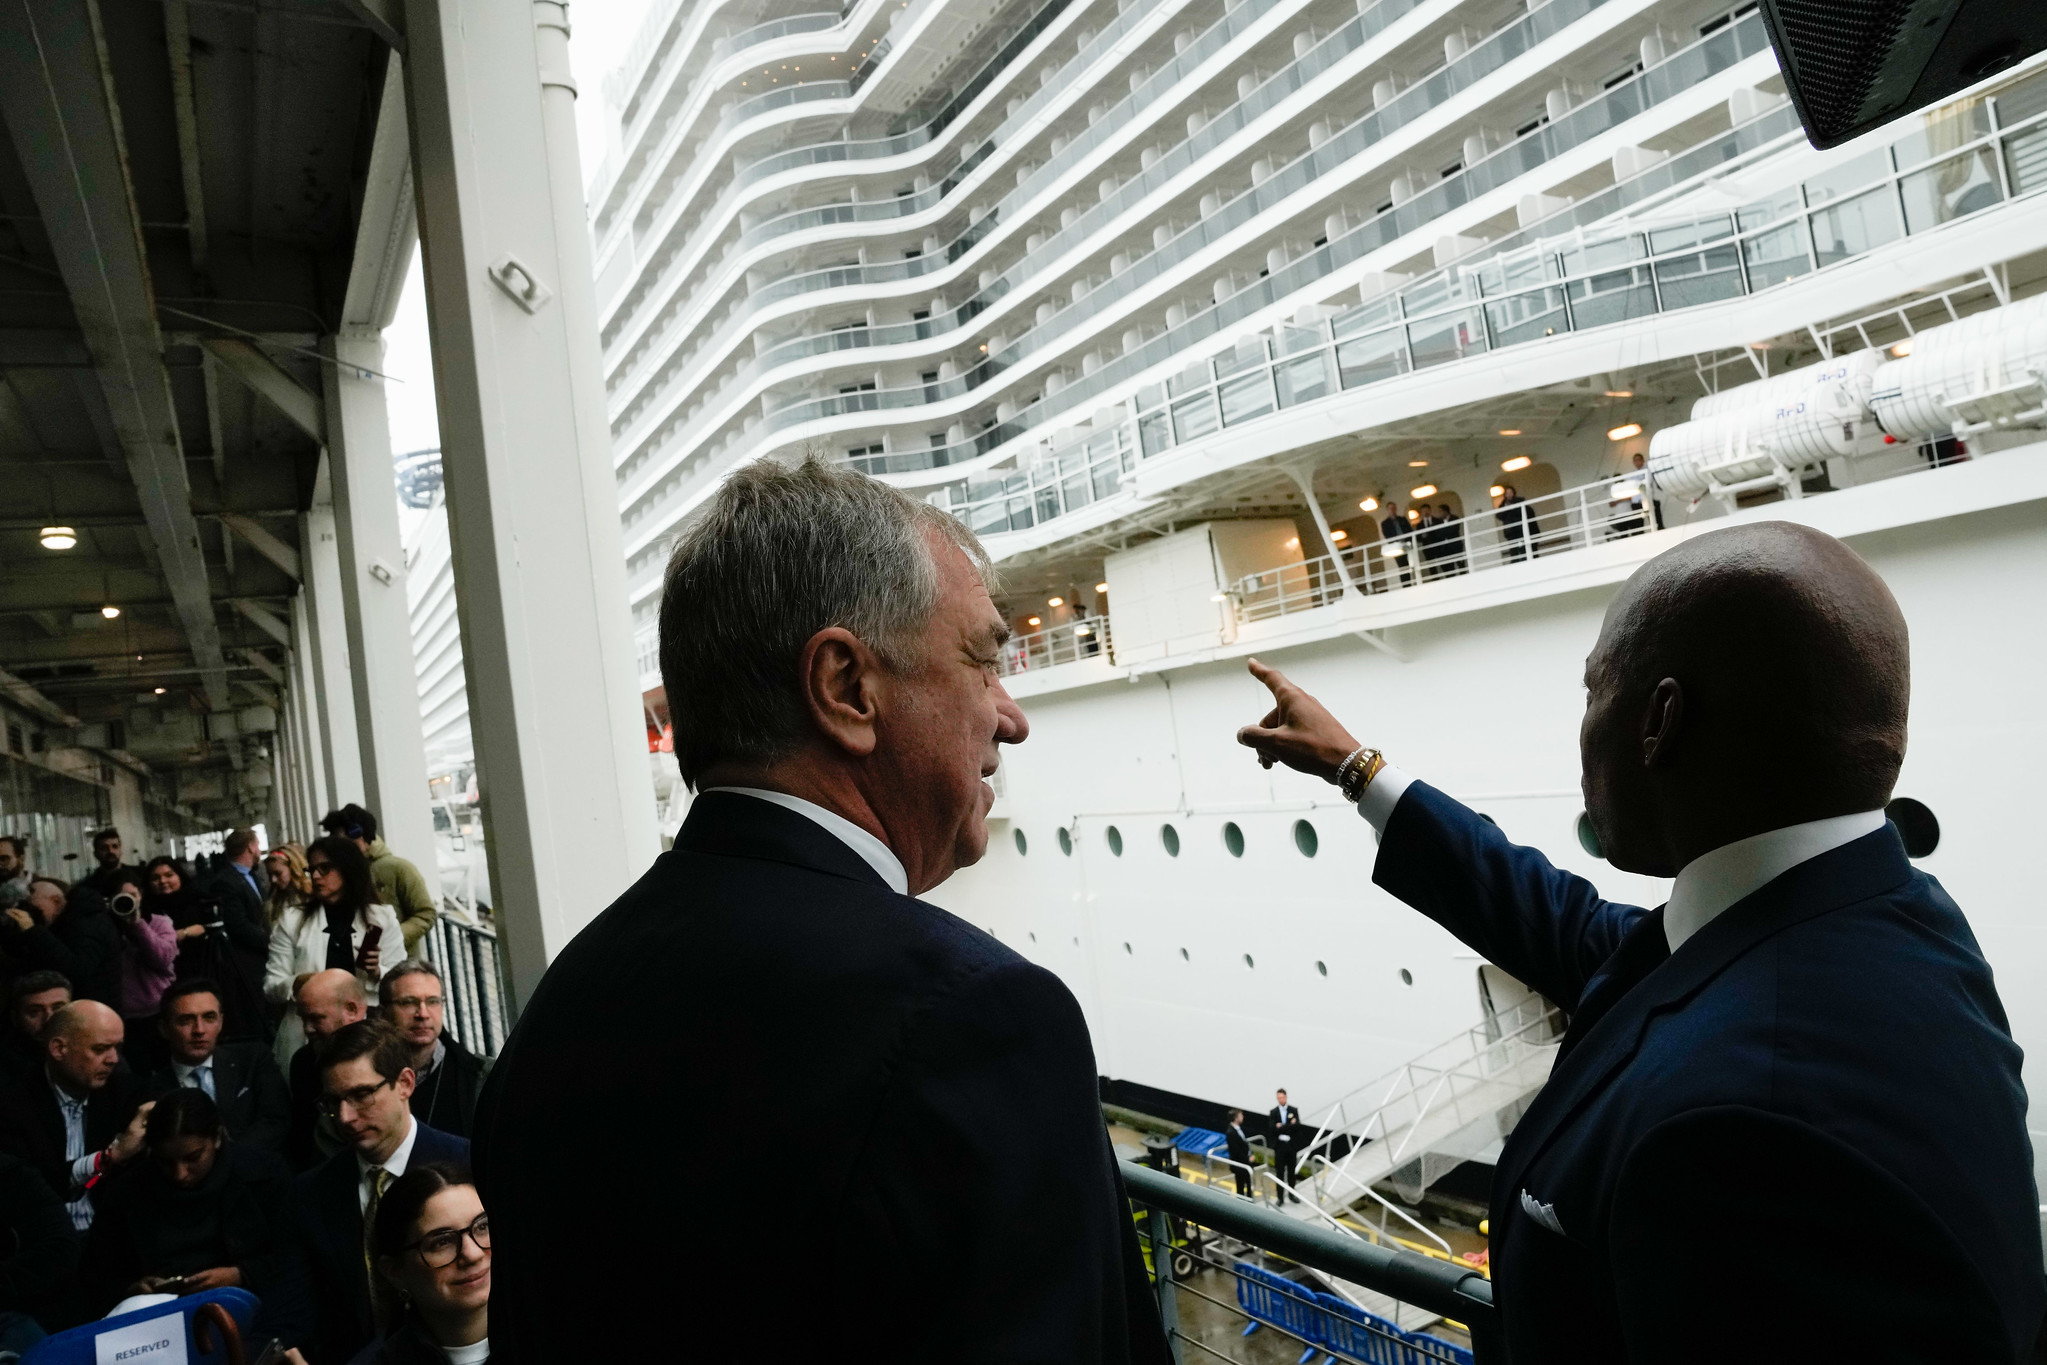 mayor points at a cruise ship